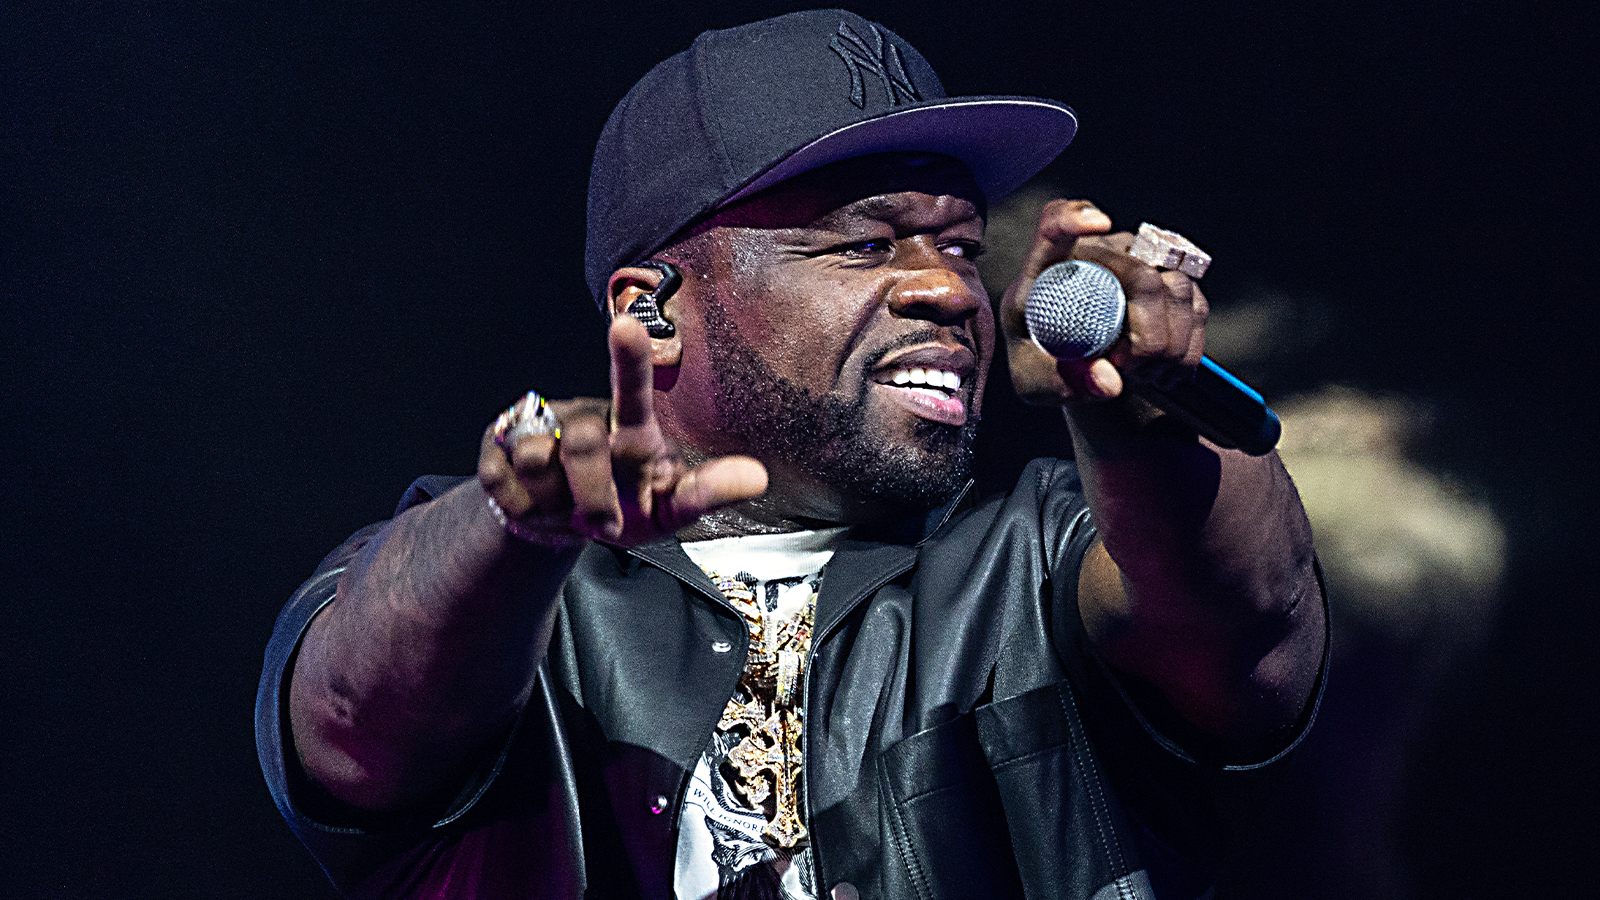 50 Cent Faces Charges After Throwing Mic At Fan During Concert